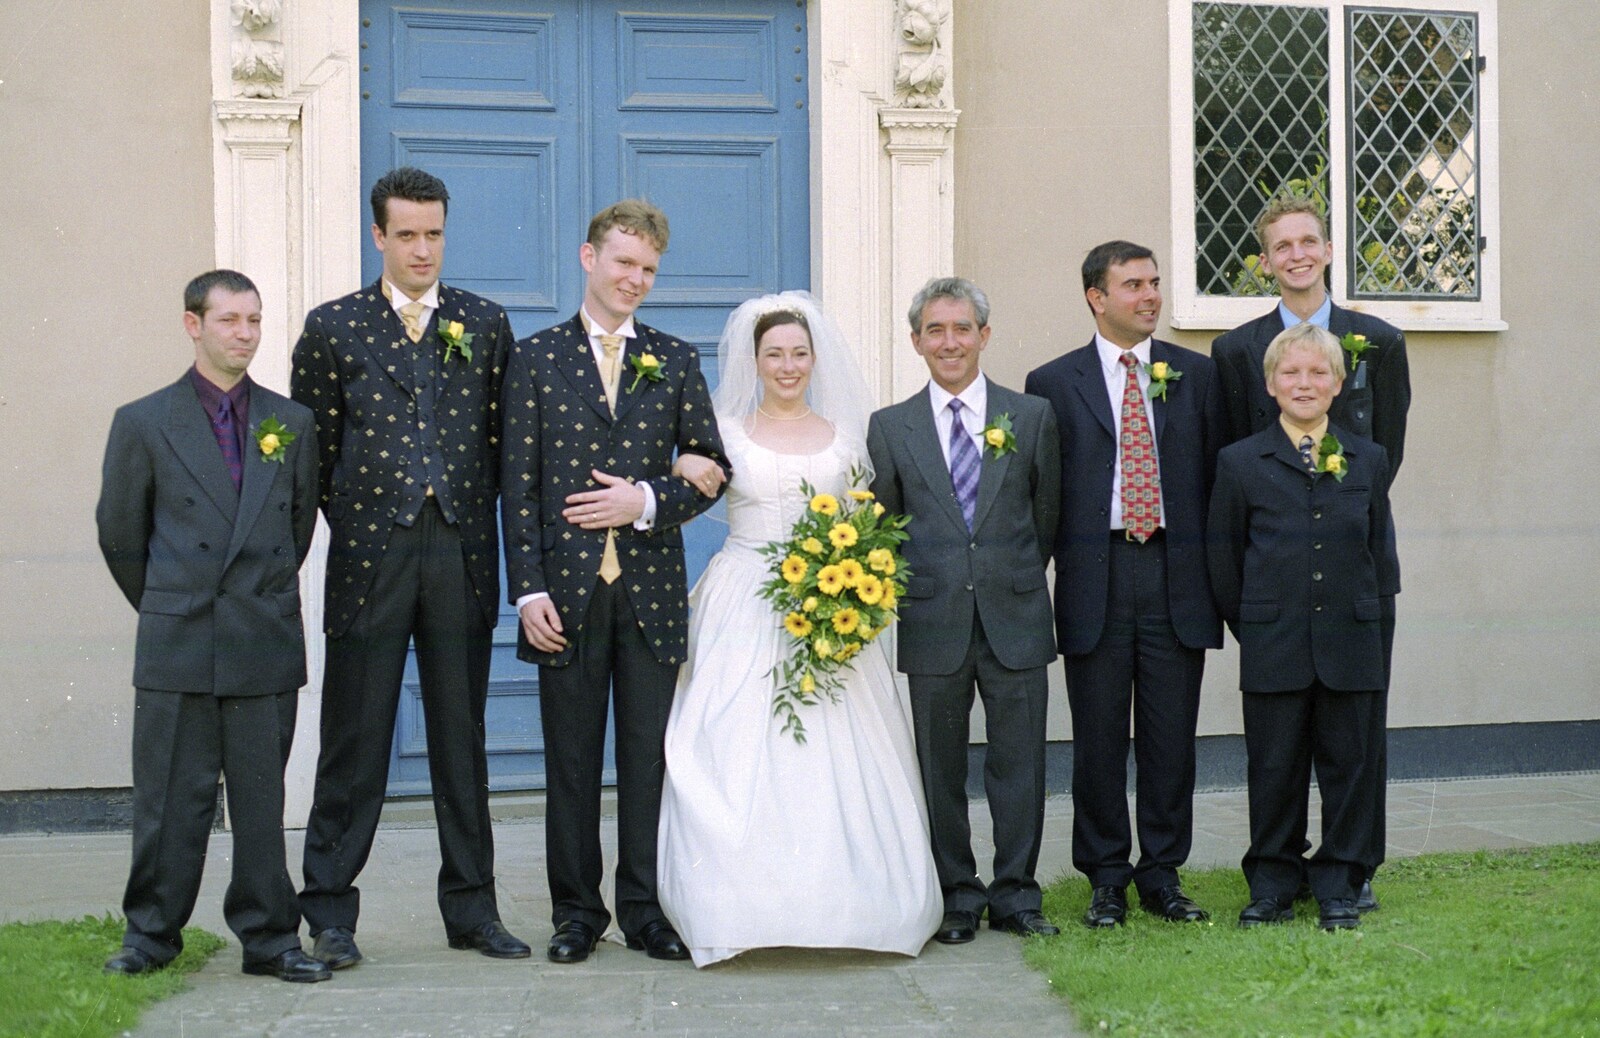 A group photo of the boys from Joe and Lesley's CISU Wedding, Ipswich, Suffolk - 30th July 1998